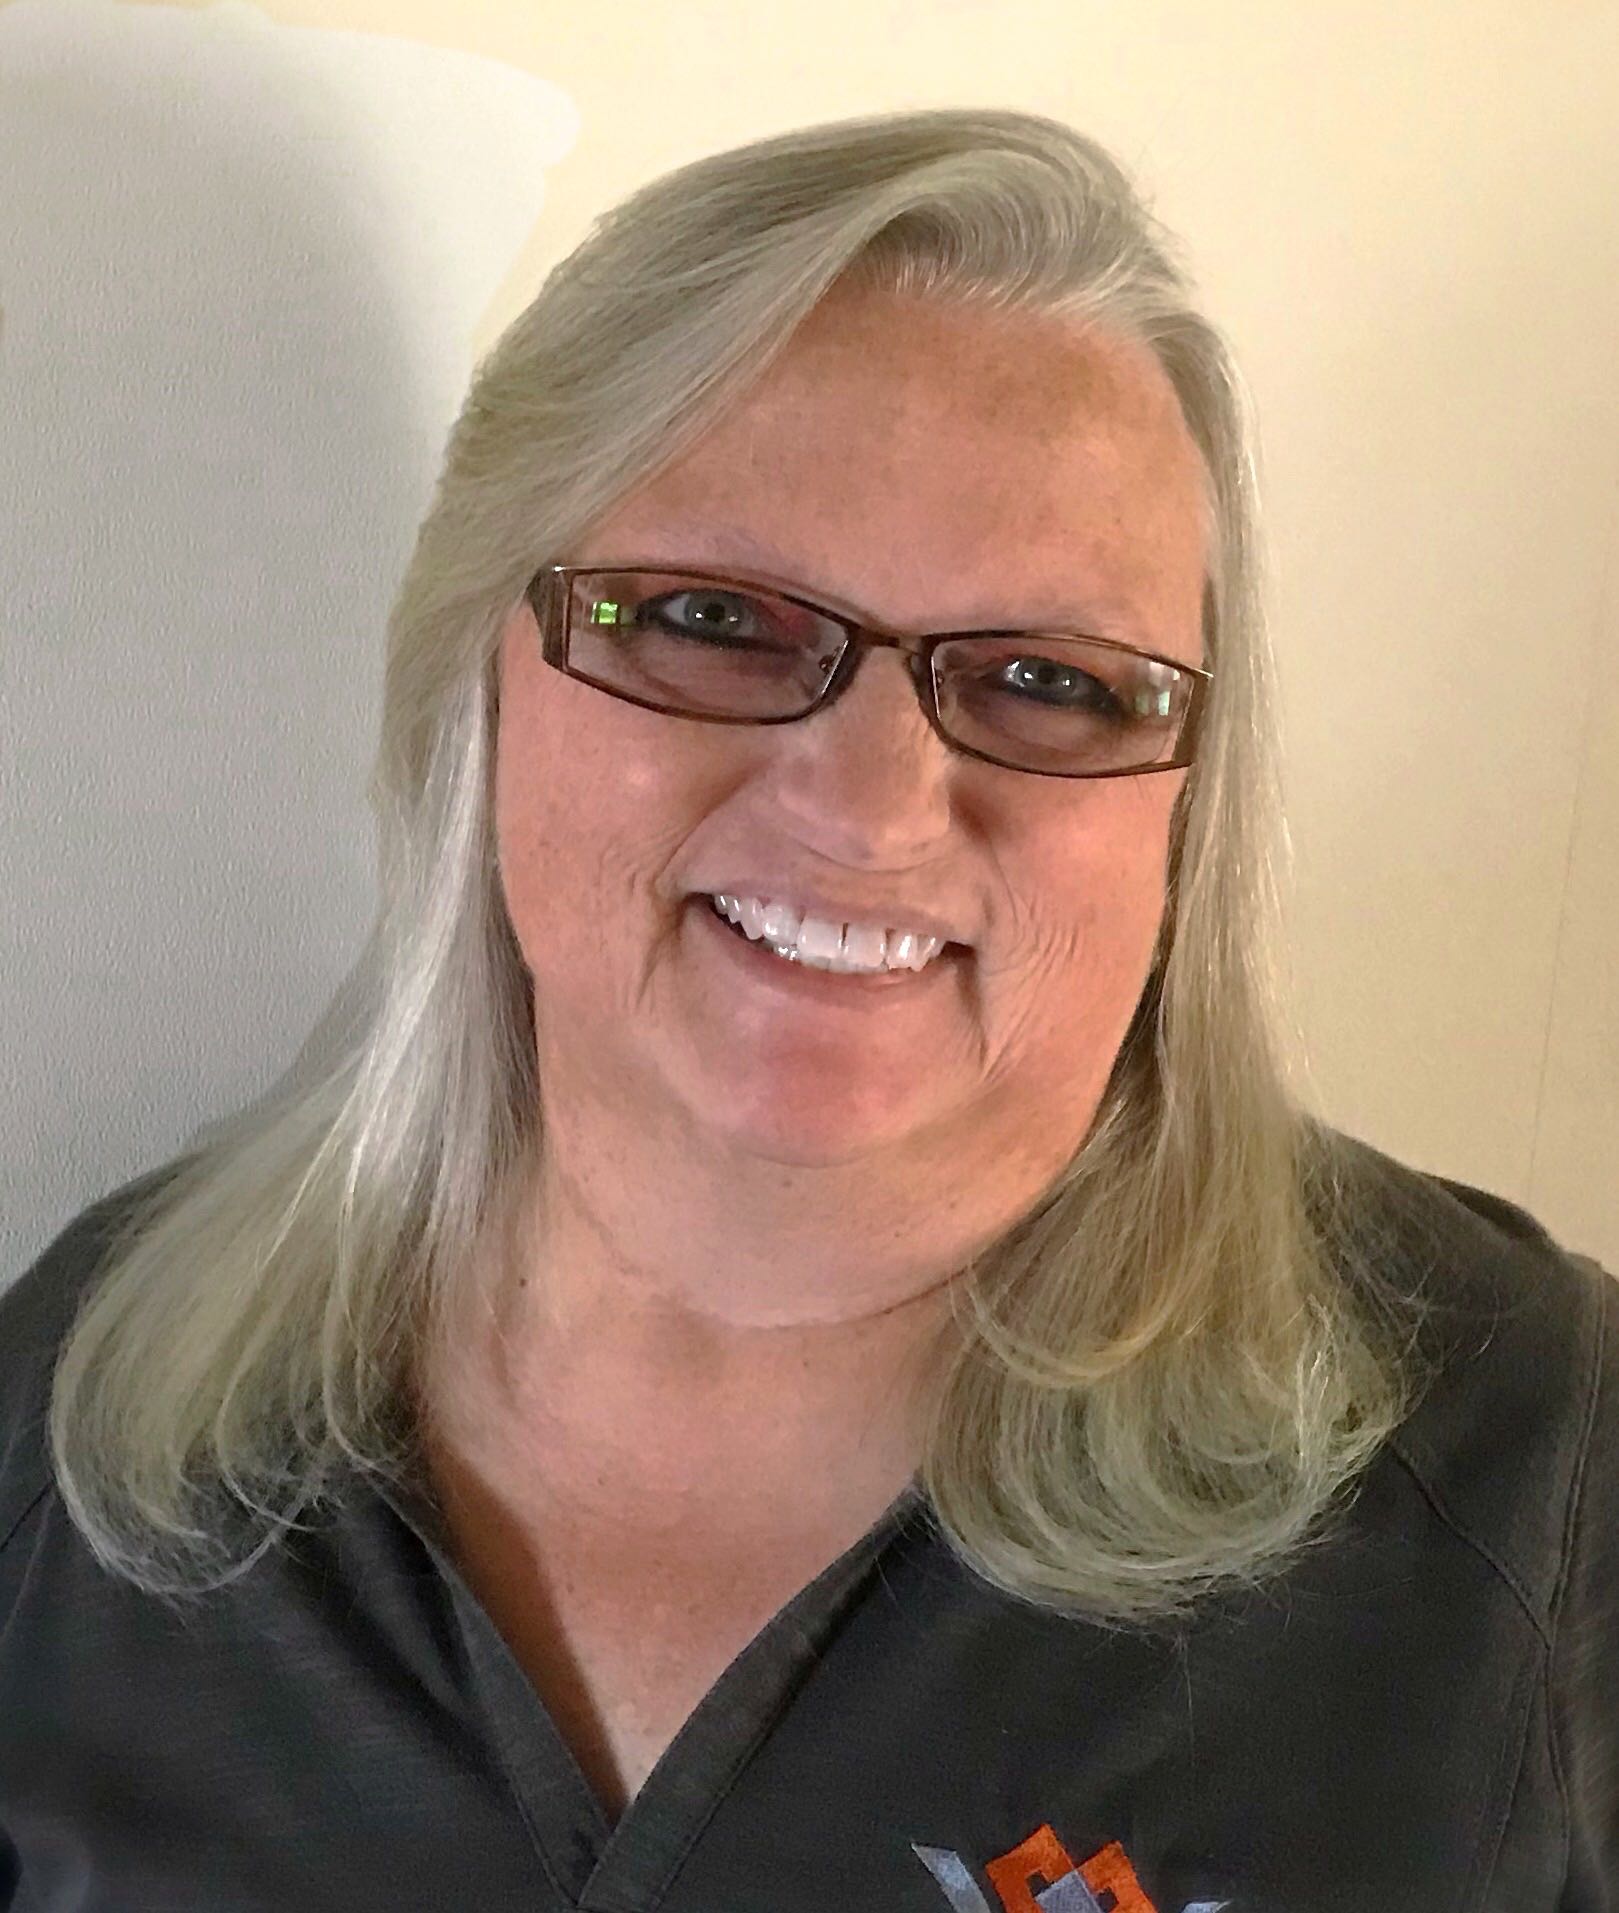 Vonnie Nealon, Warriors Heart CD Team Lead and CFRC (Certified First Responder Counselor), featured "TIME Special Edition: The Science of Addiction" (2019) in the “Beyond The 12 Steps” story.